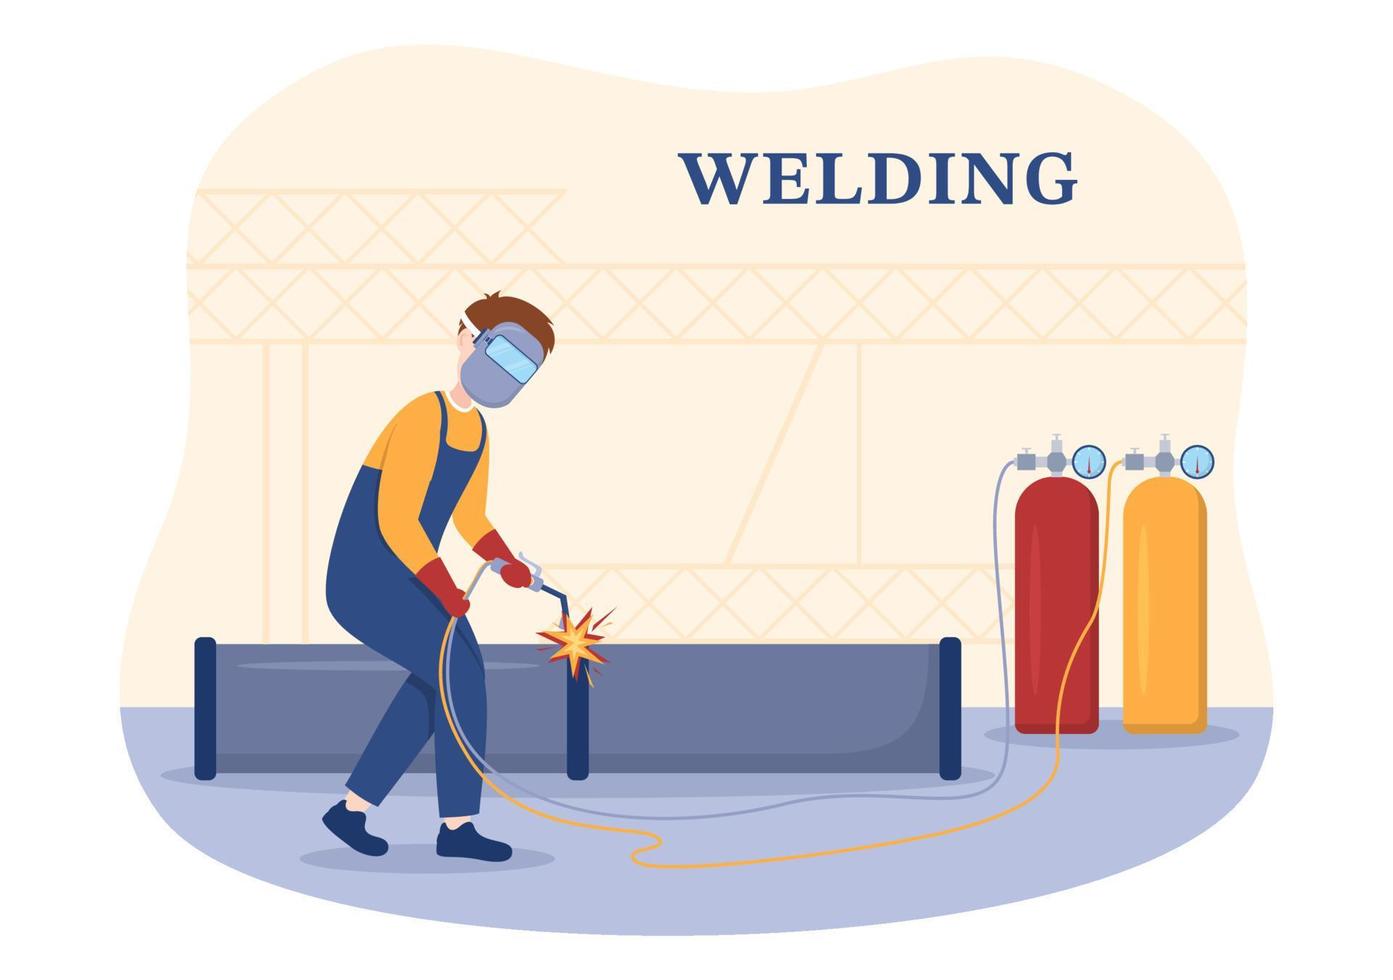 Welding Service with Professional Welder Job Weld Metal Structures, Pipe and Steel Construction in Flat Cartoon Hand Drawn Templates Illustration vector